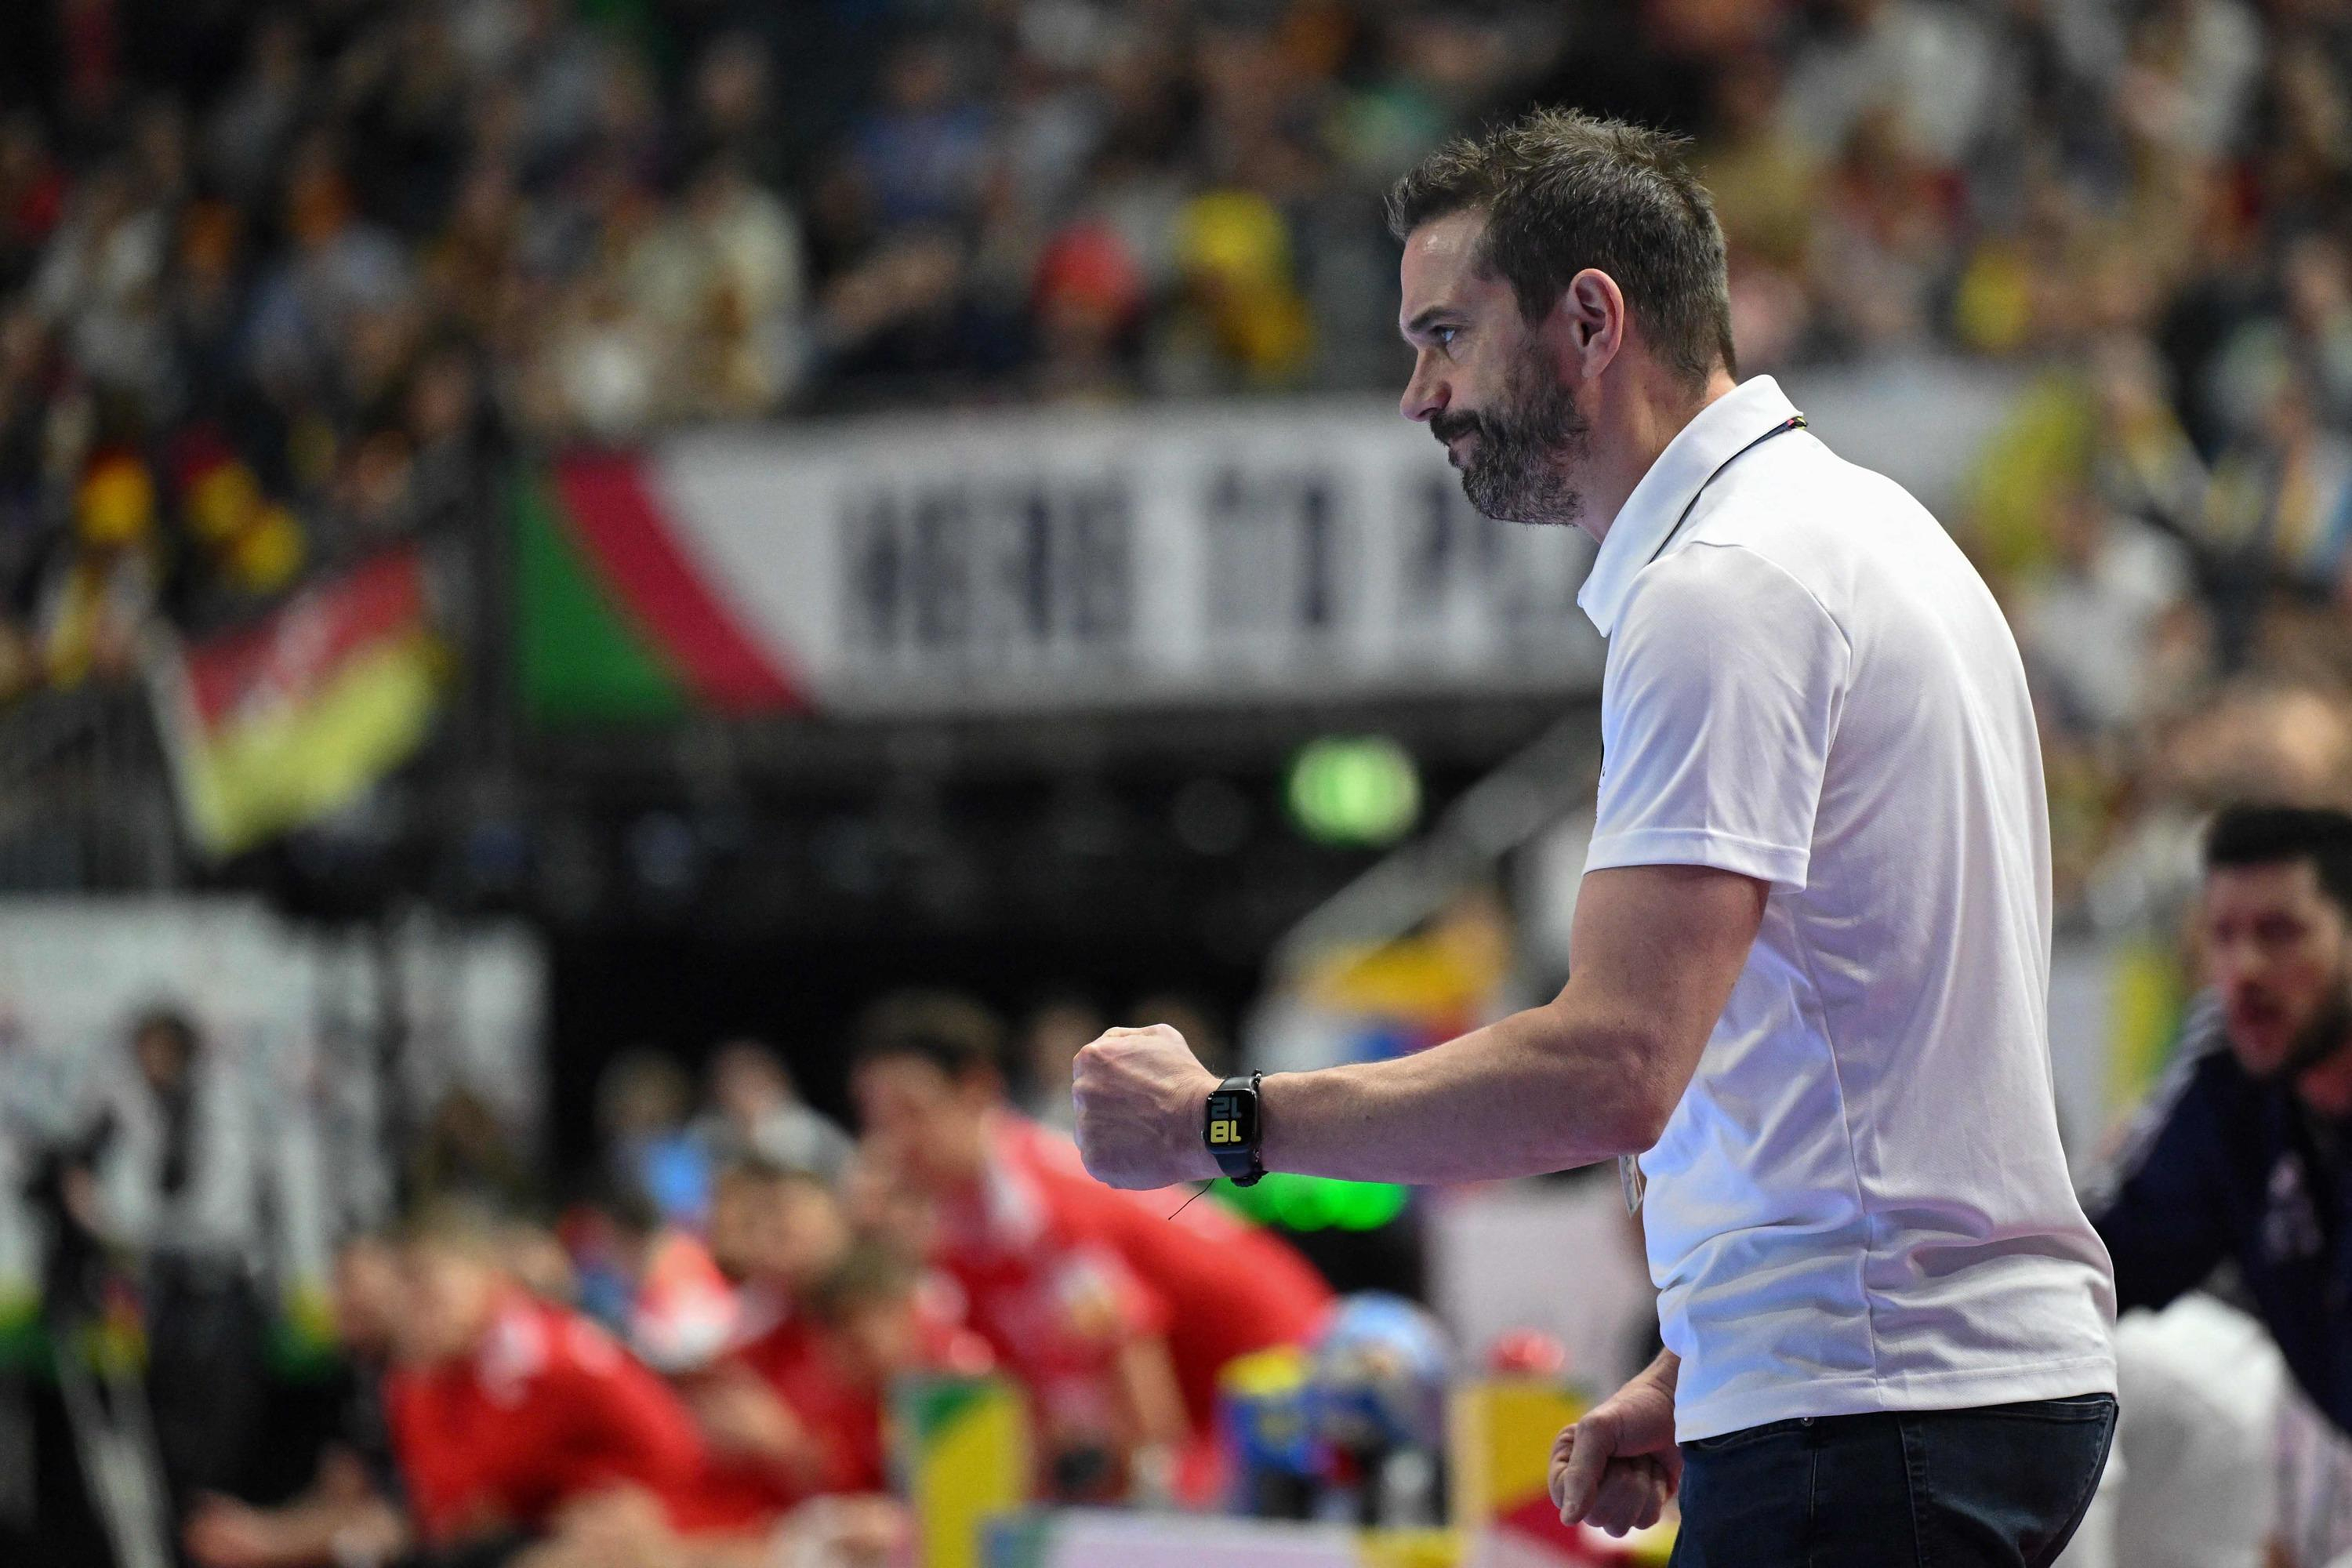 Euro handball: the Blues are “more sure of their strength”, judge Guillaume Gille